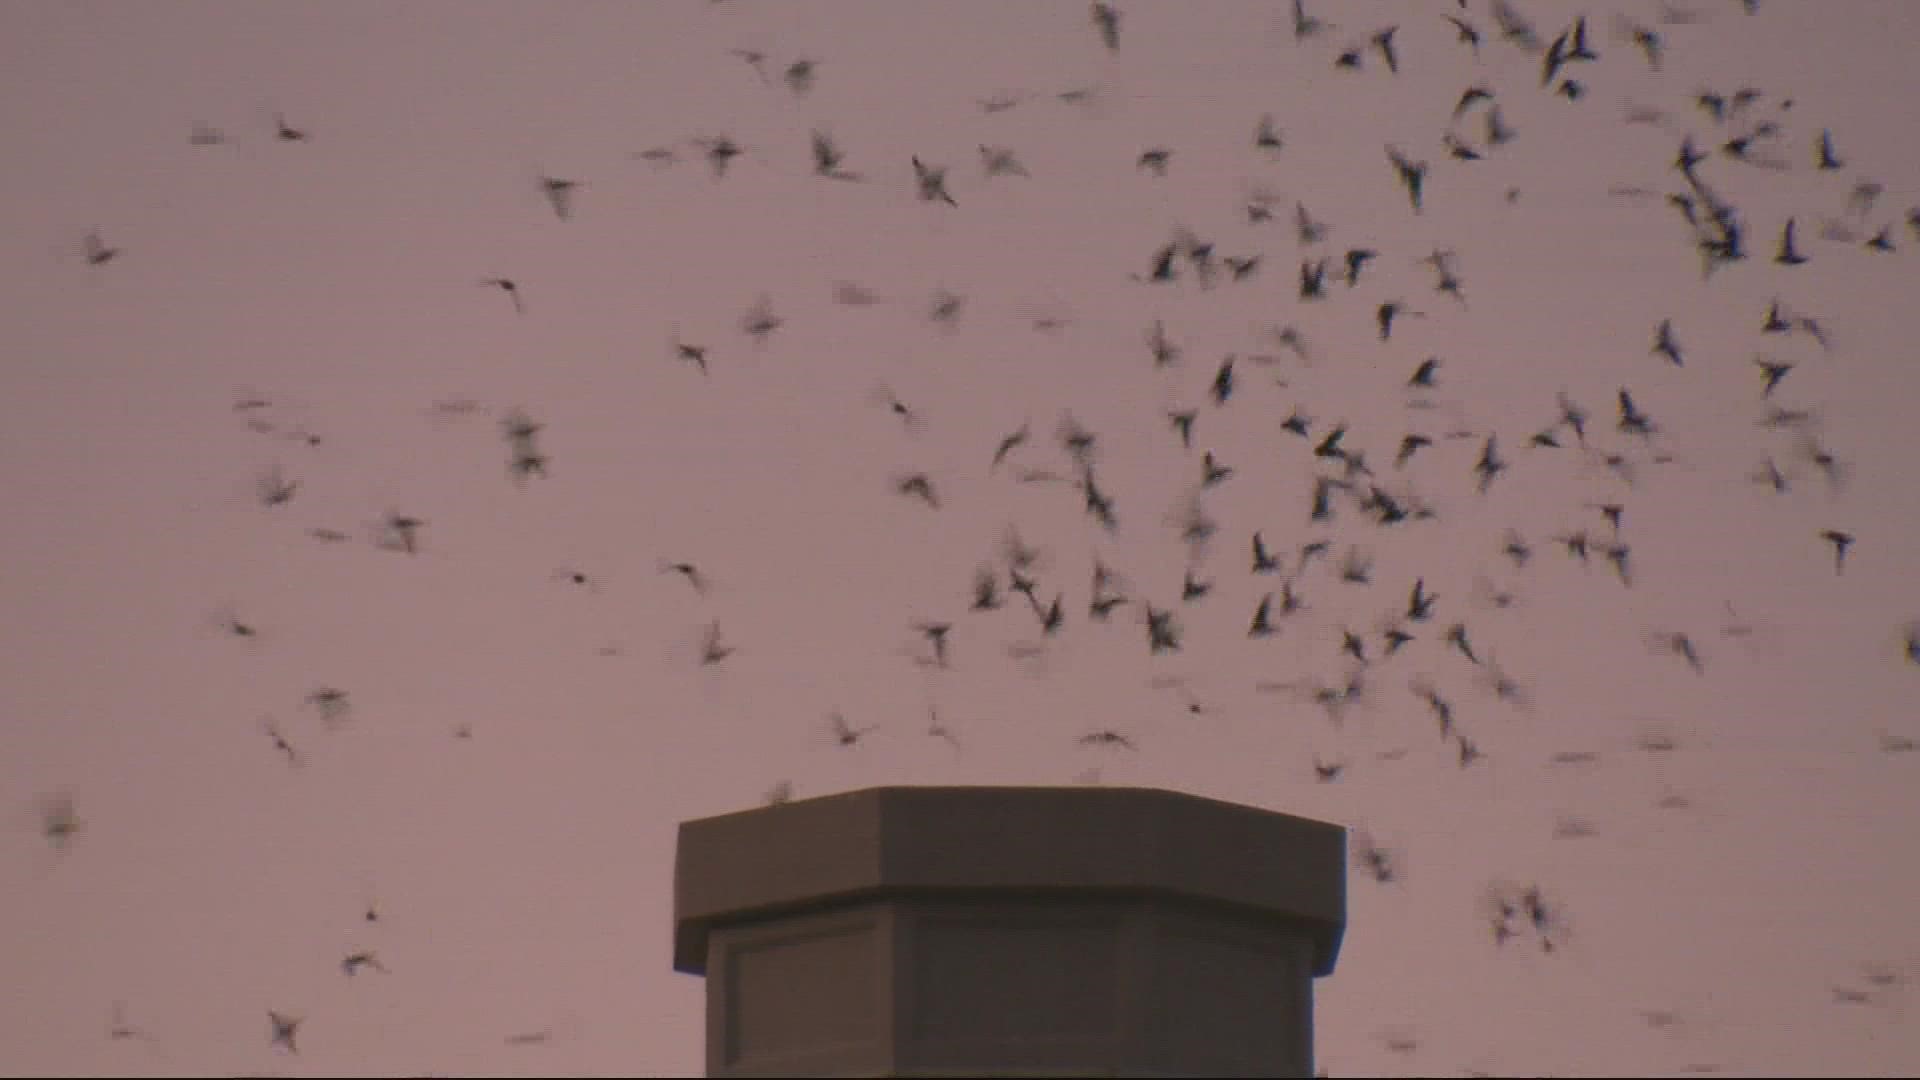 Every year in September, thousands of small and speedy Vaux's swifts swarm the chimney at Chapman Elementary — one of the largest known roosting sites for the birds.